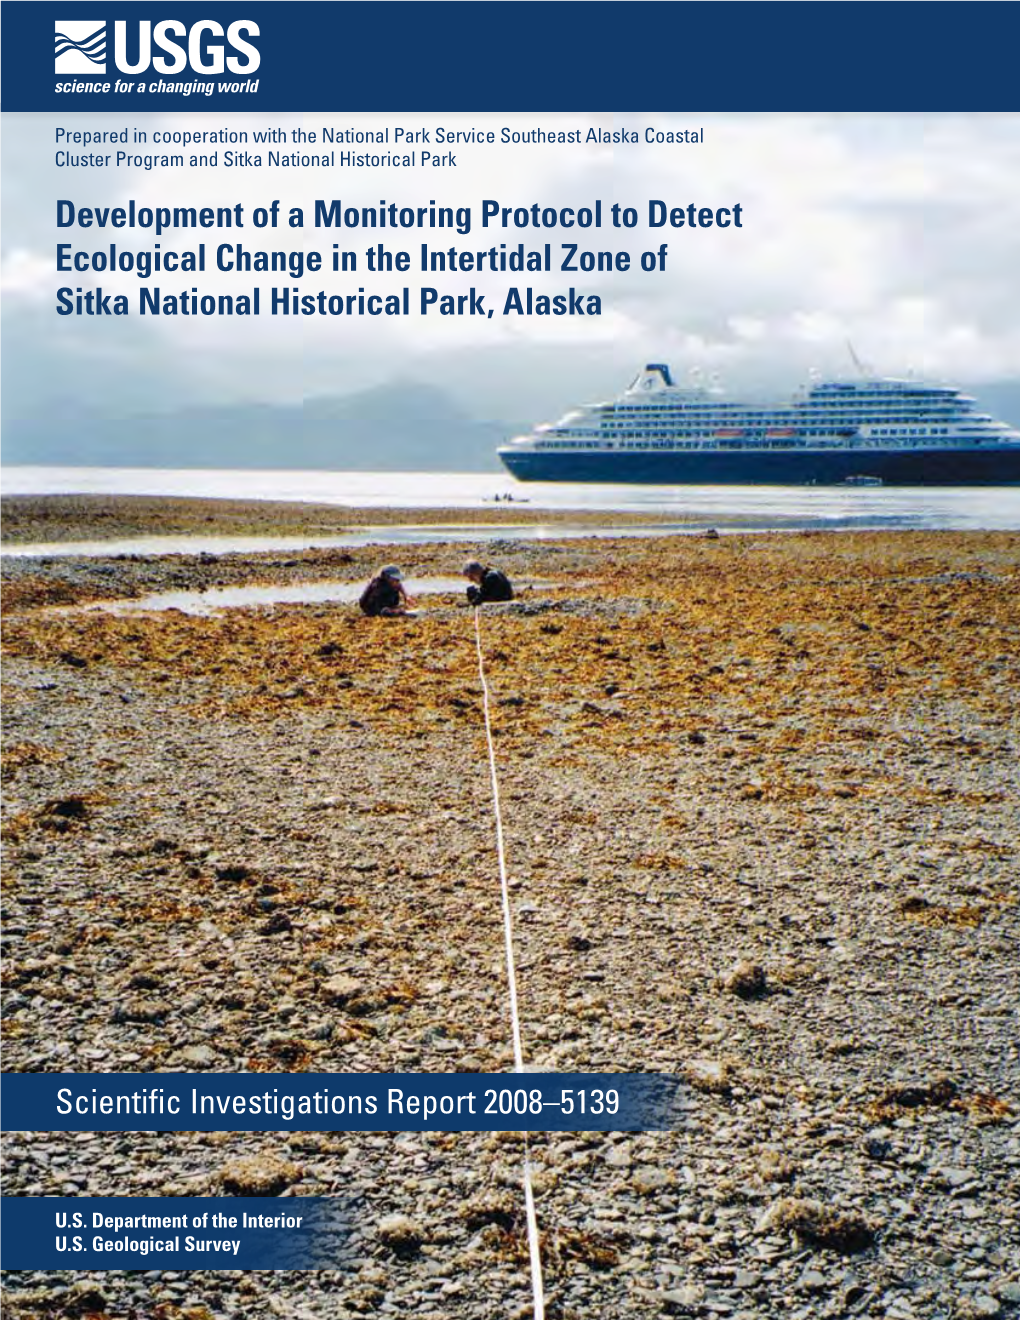 Development of a Monitoring Protocol to Detect Ecological Change in the Intertidal Zone of Sitka National Historical Park, Alaska